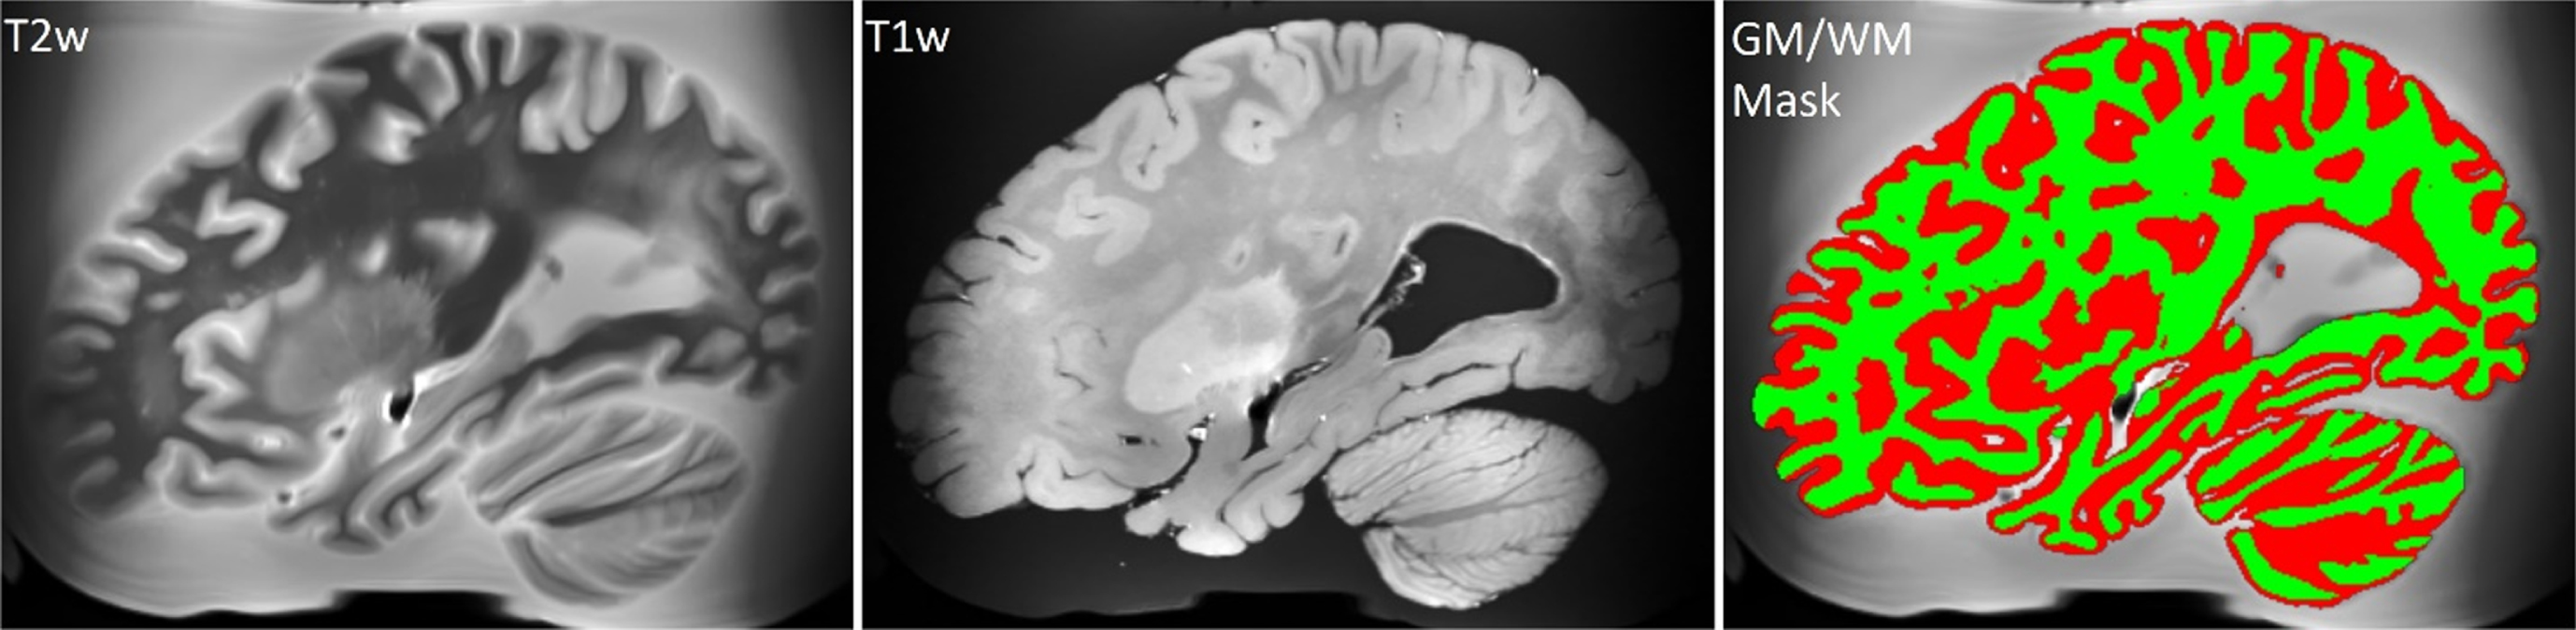 T2-weighted MRI registered in the space of the T1-weighted MRI scan, unprocessed T1-weighted MRI scan, and brain tissues segmentation derived from the T2-weighted scan (white matter is colored in green).